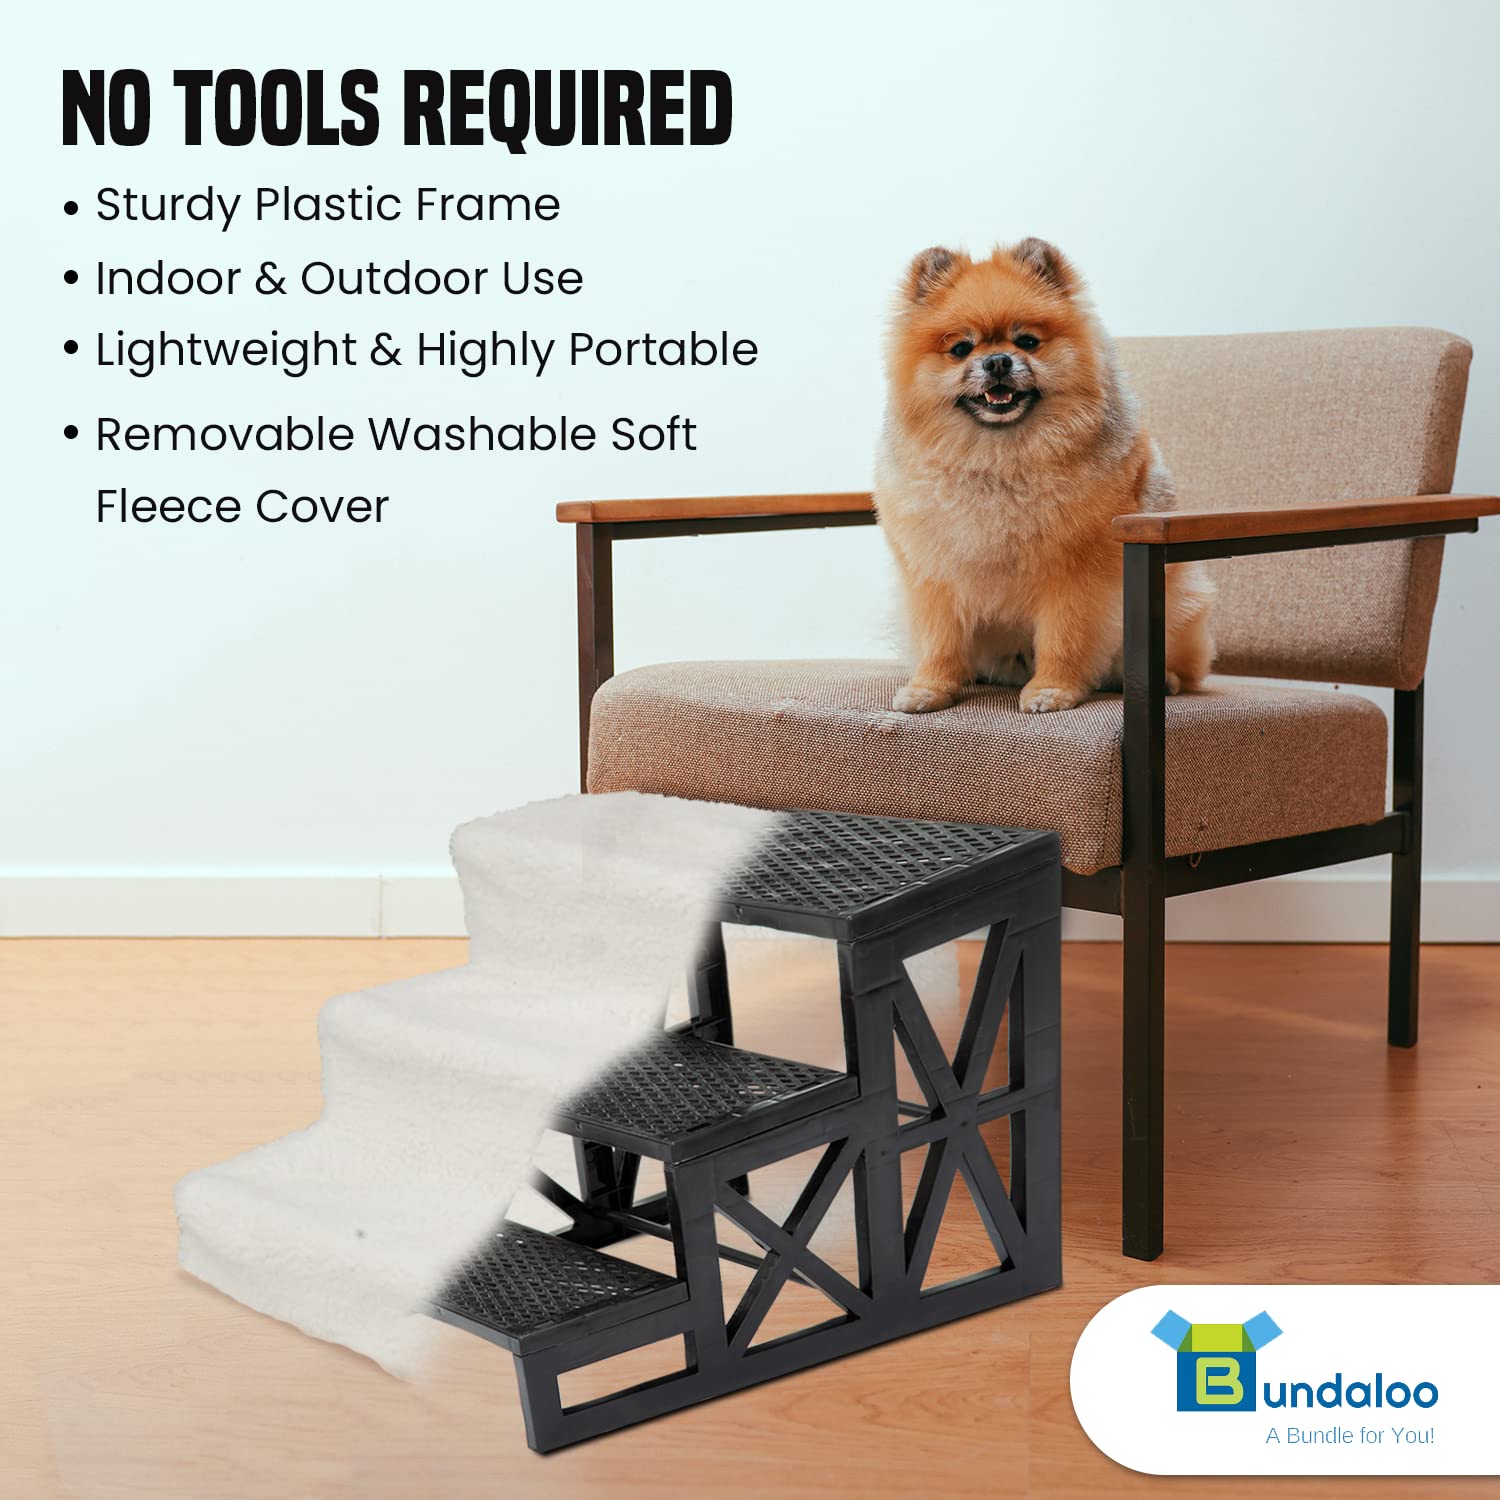 Bundaloo Dog Stairs for High Beds, Steps for Smaller Pets with Removable and Washable Cover, No Tools Required  - Like New